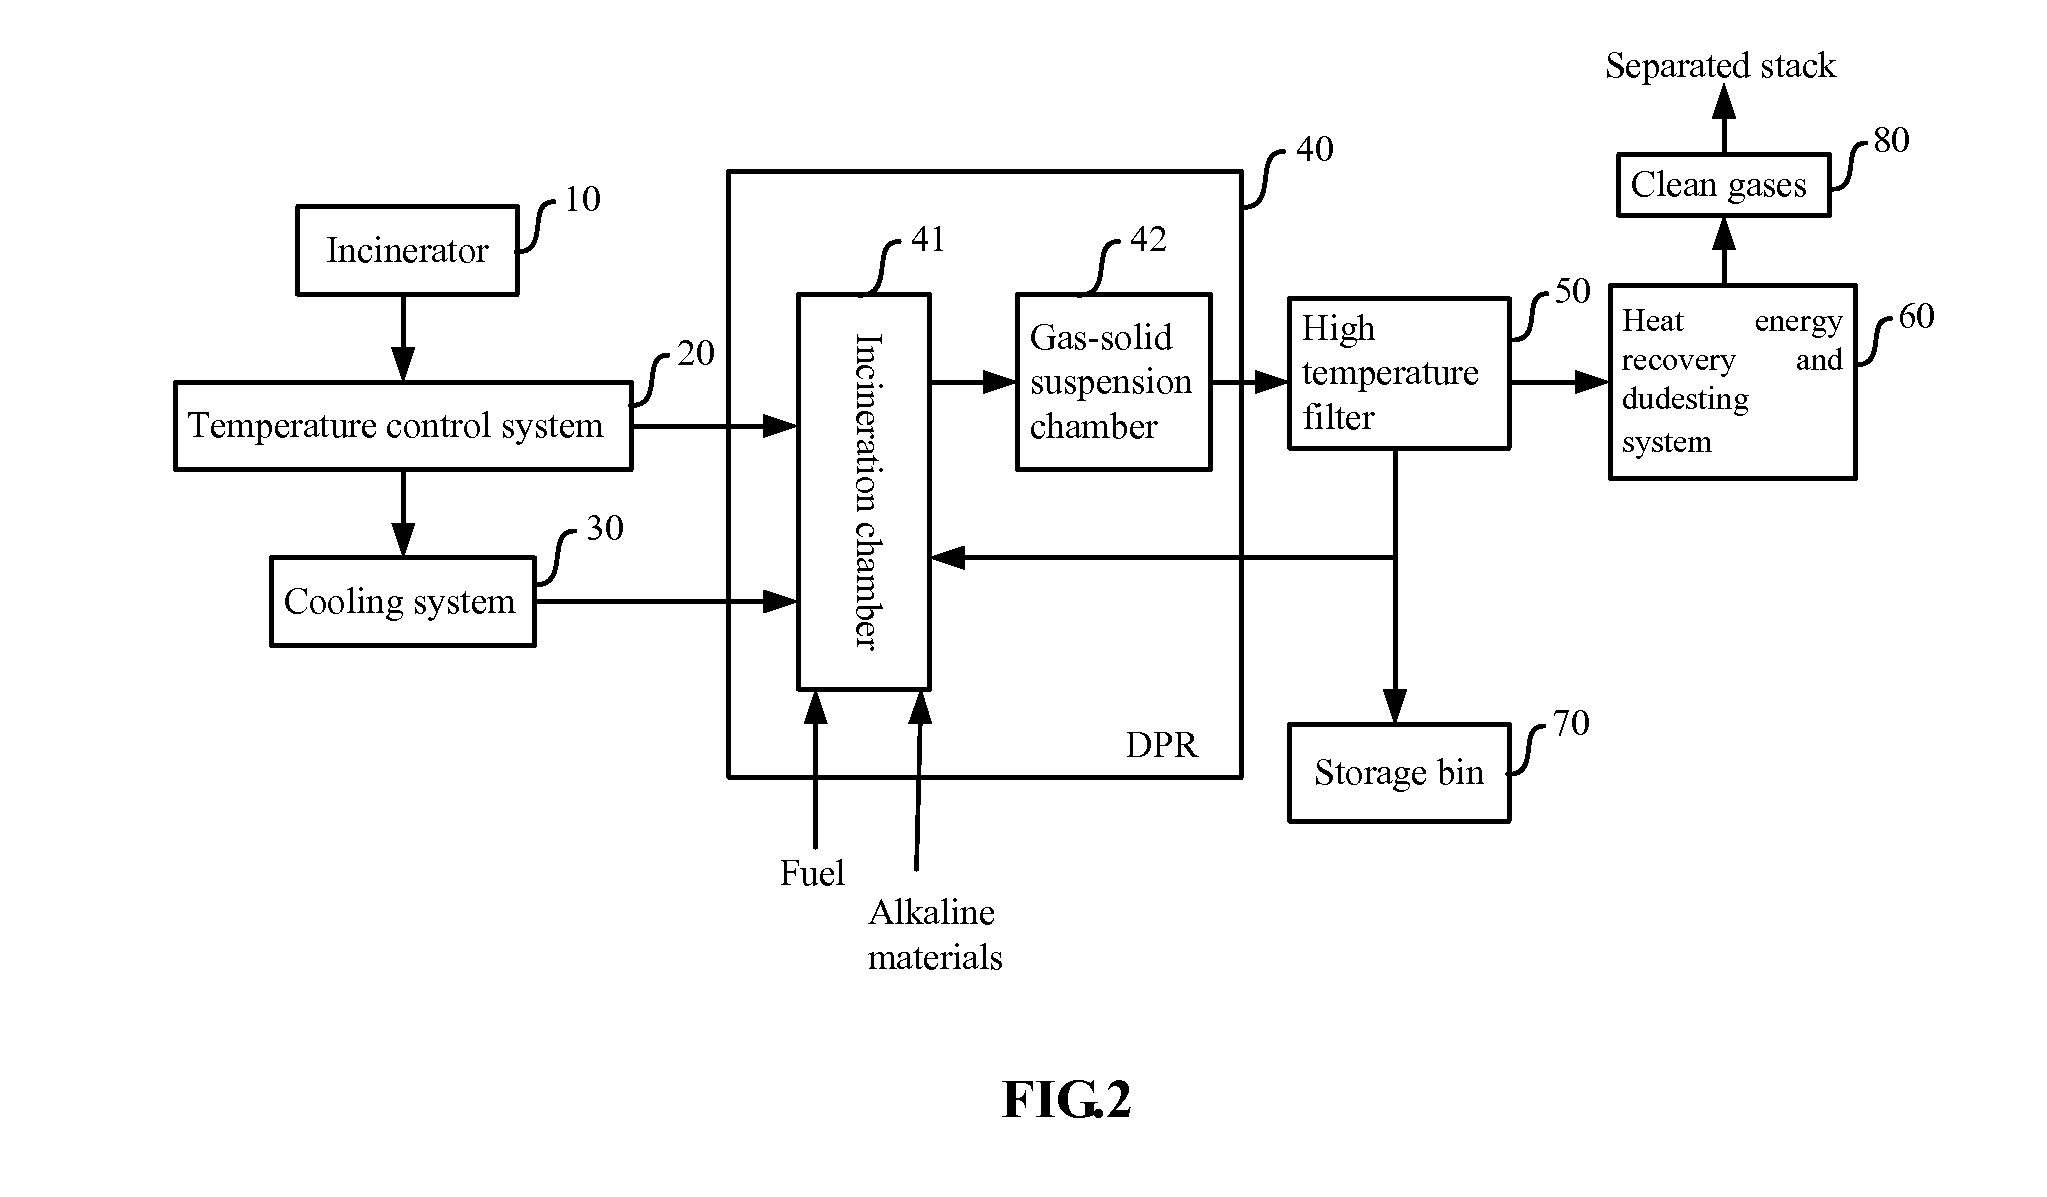 Method for the treatment of exhaust gas produced by high-temperature waste incinerator with a dual-purpose reactor and the system thereof